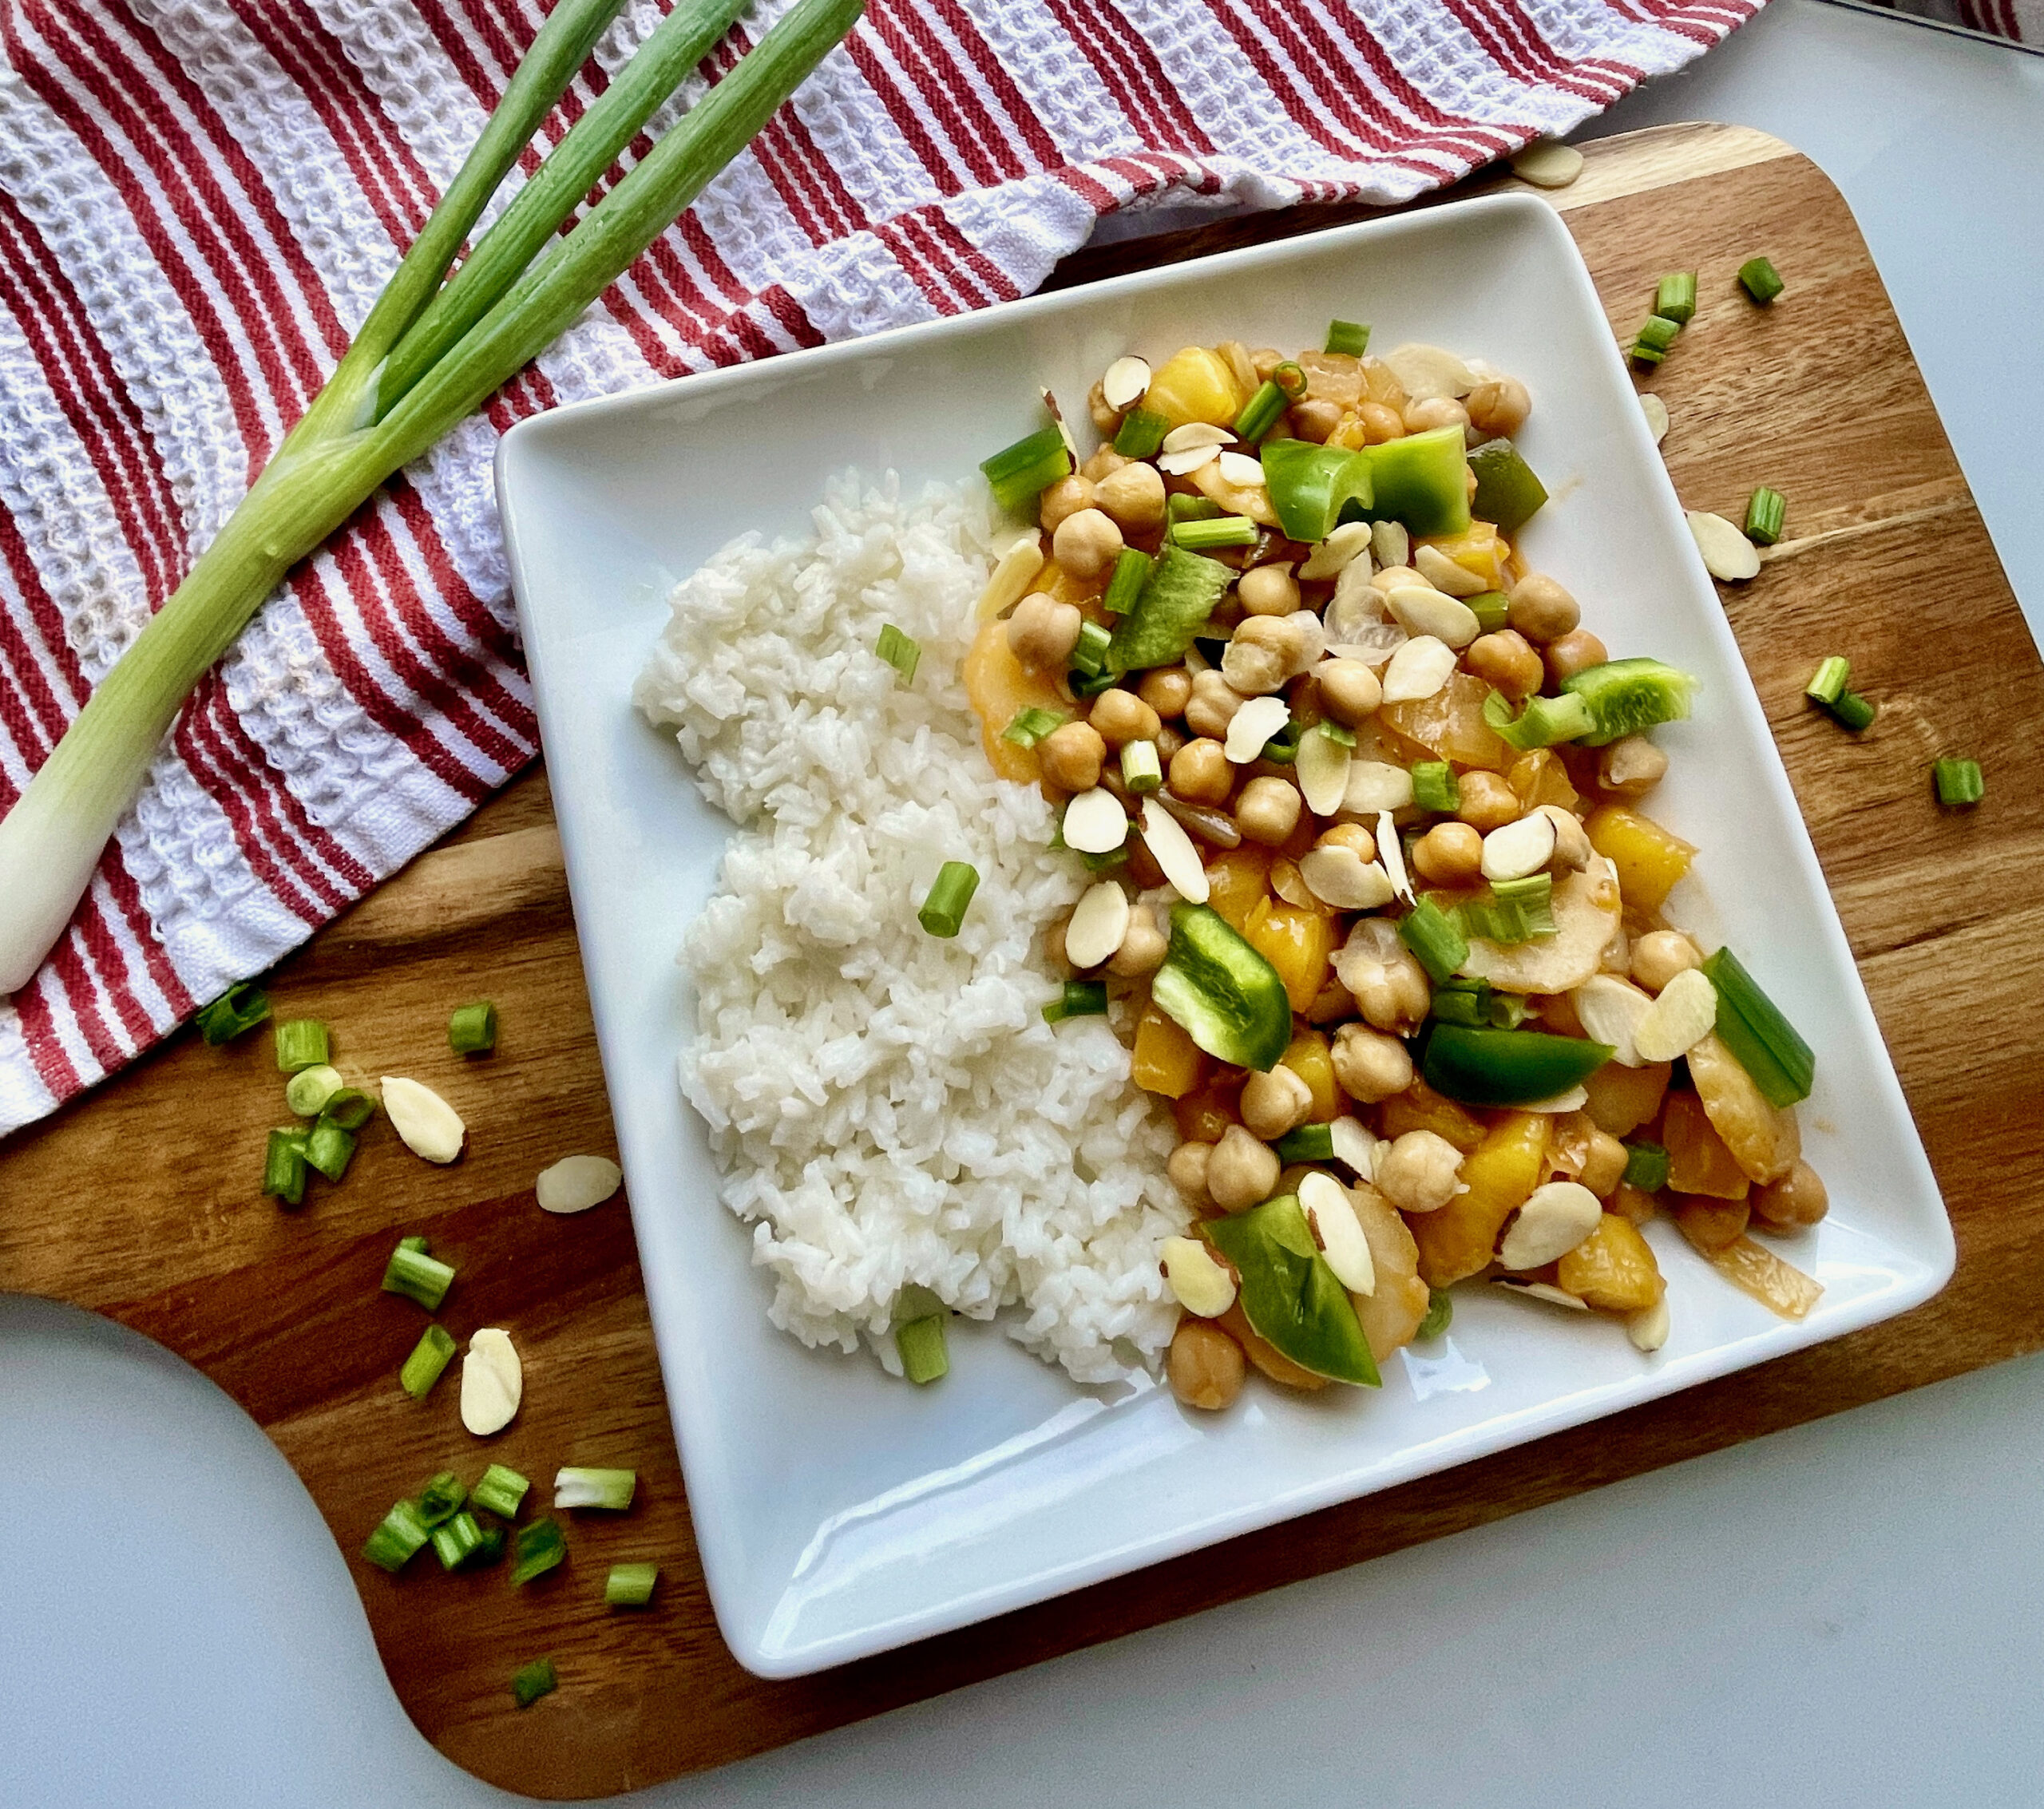 Cupboard Cookout: Sweet and Sour Vegan Stir-Fry